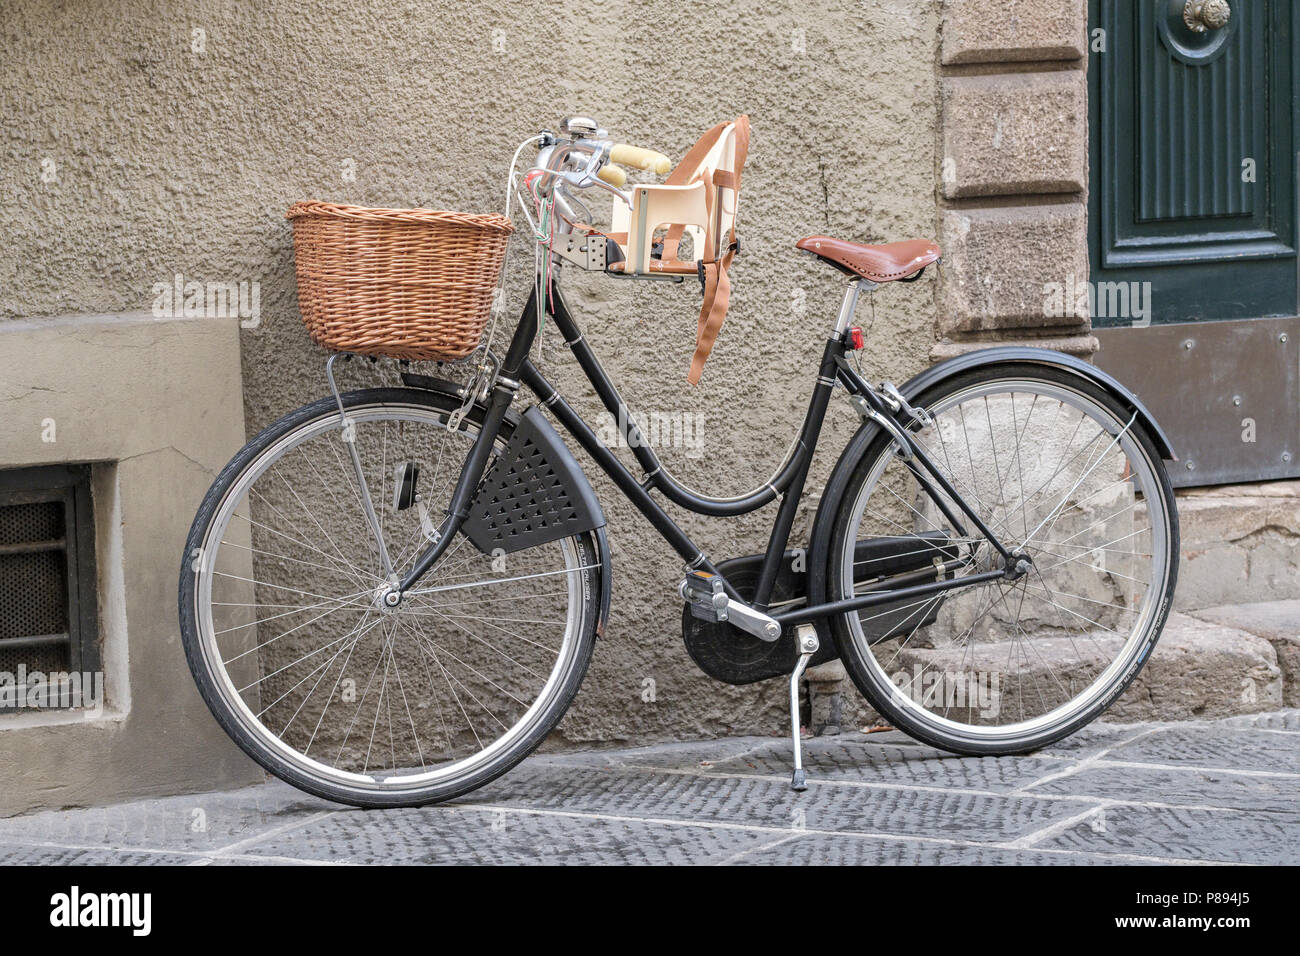 Bicycle with basket and childs seat, old city street in Lucca, Tuscany, Italy, Europe, Stock Photo